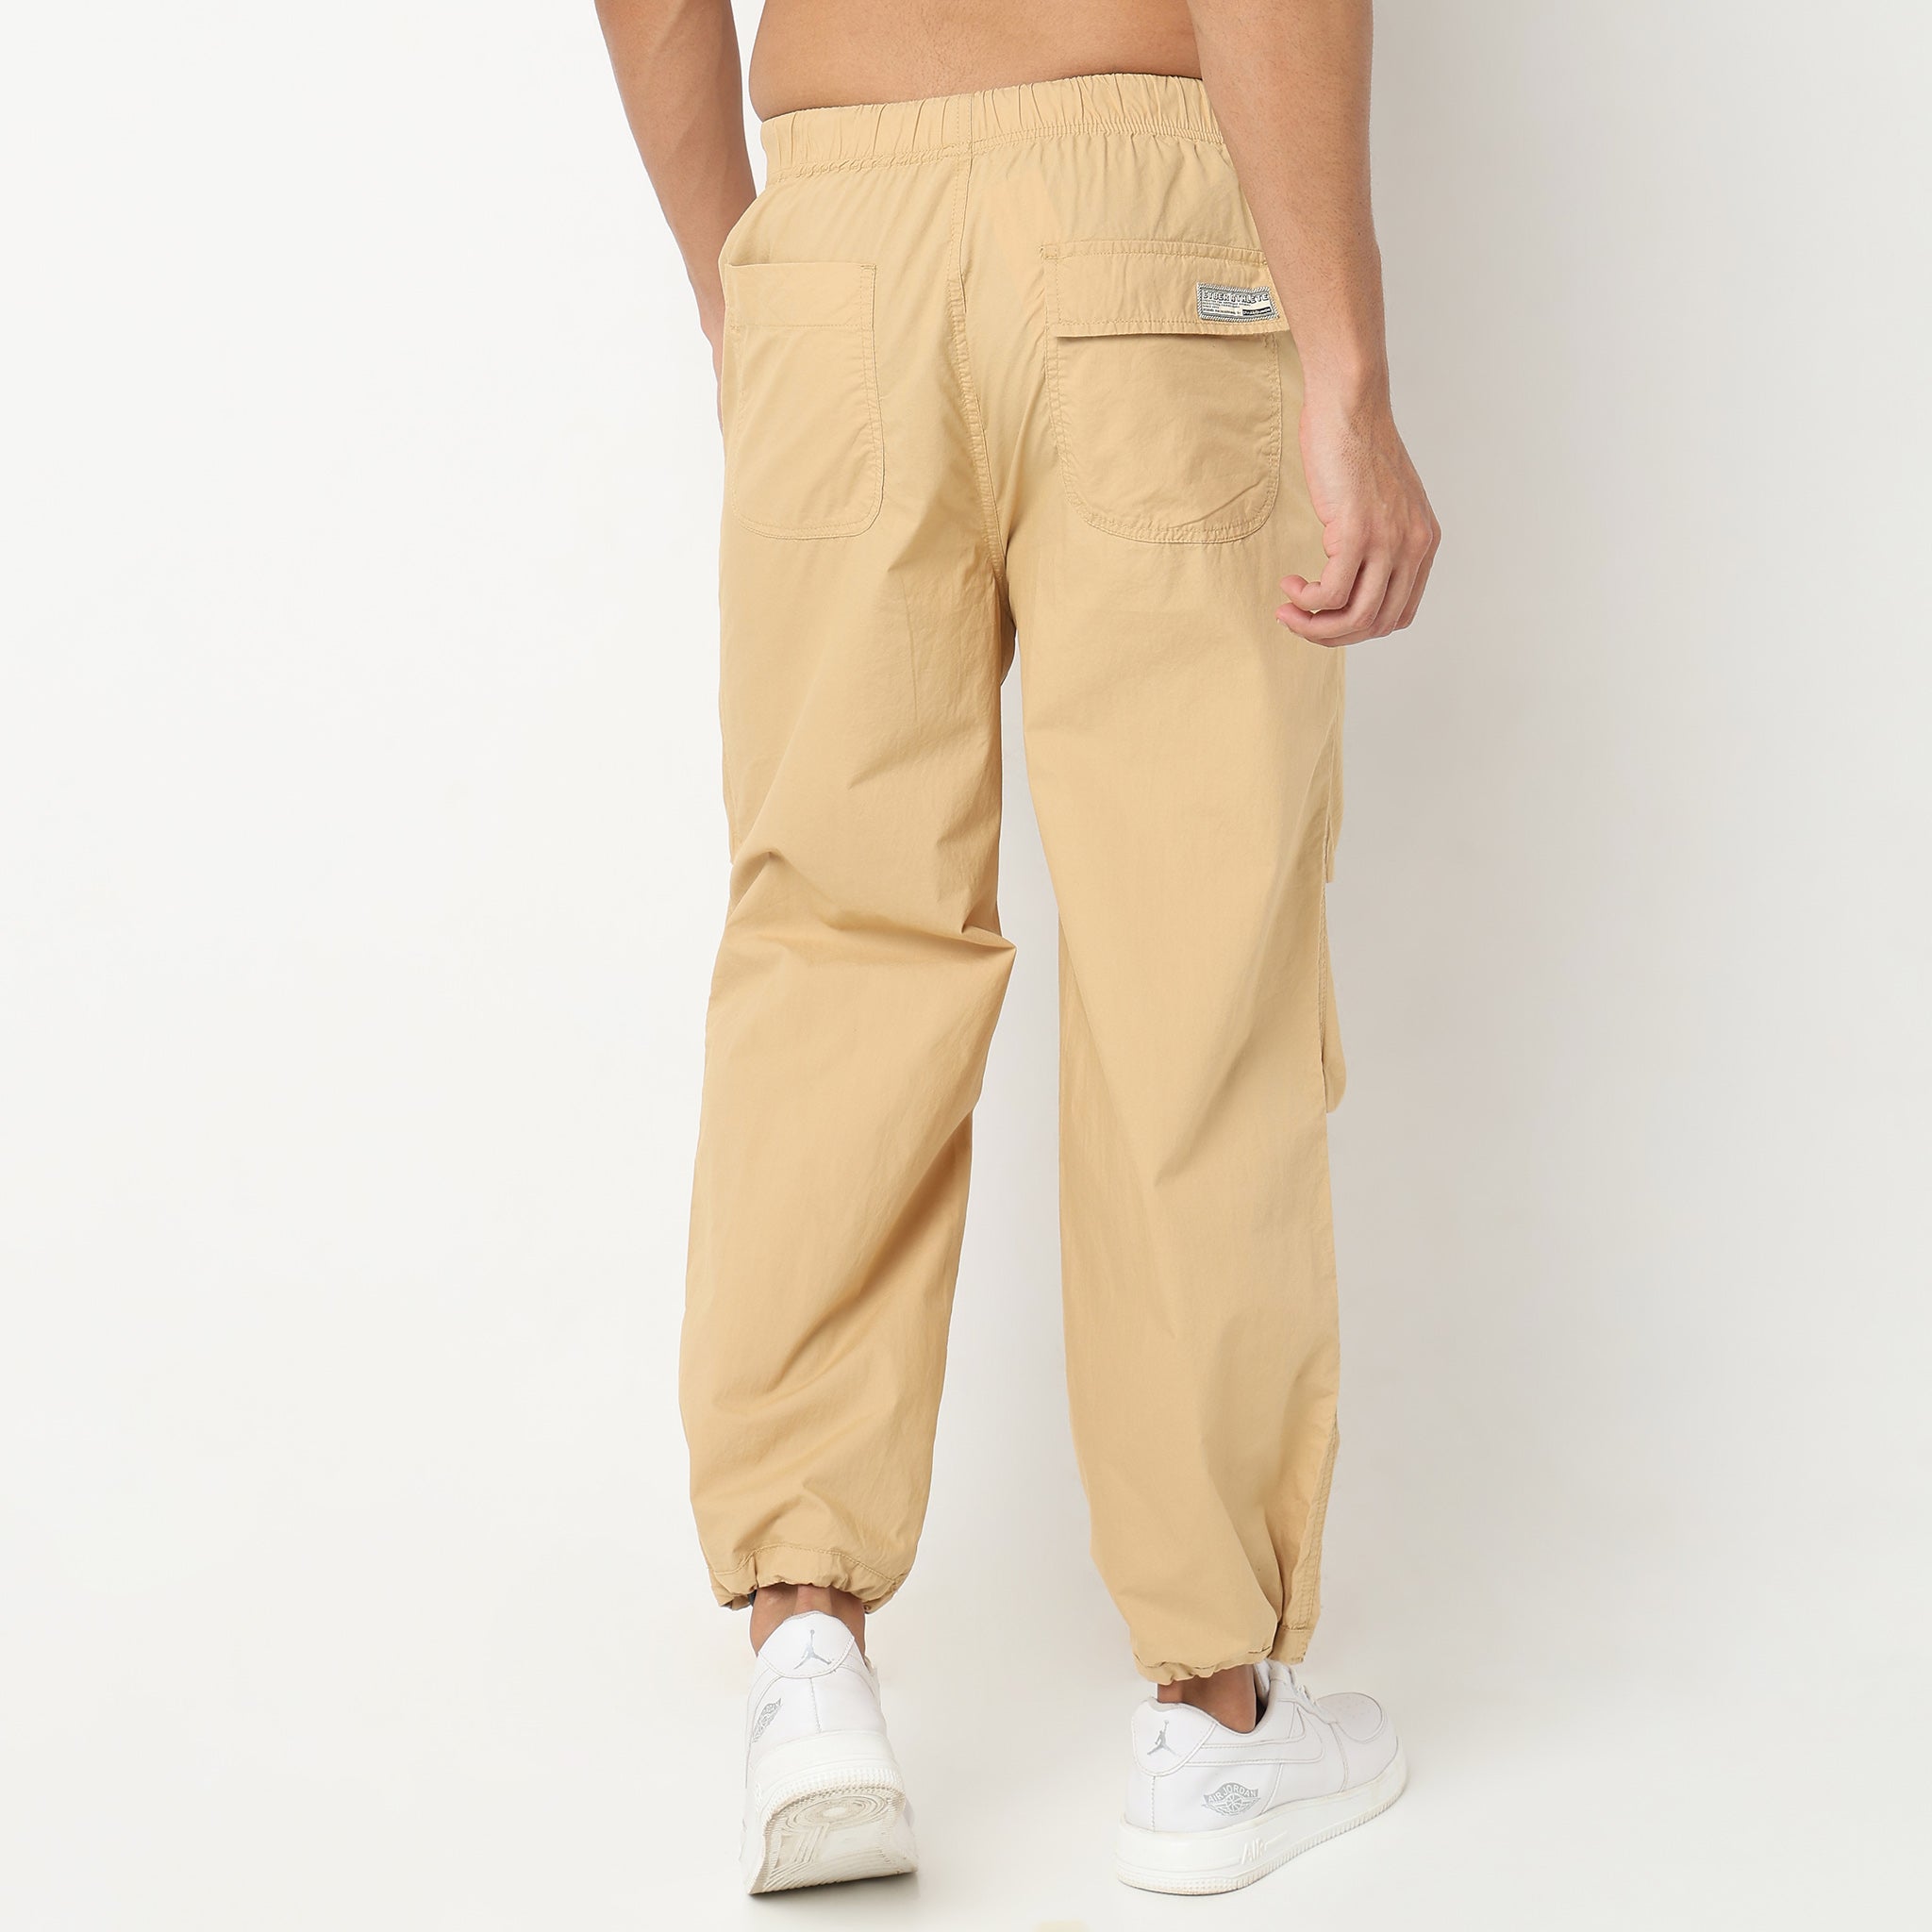 Women Solid Light Beige Mid Rise Casual Joggers